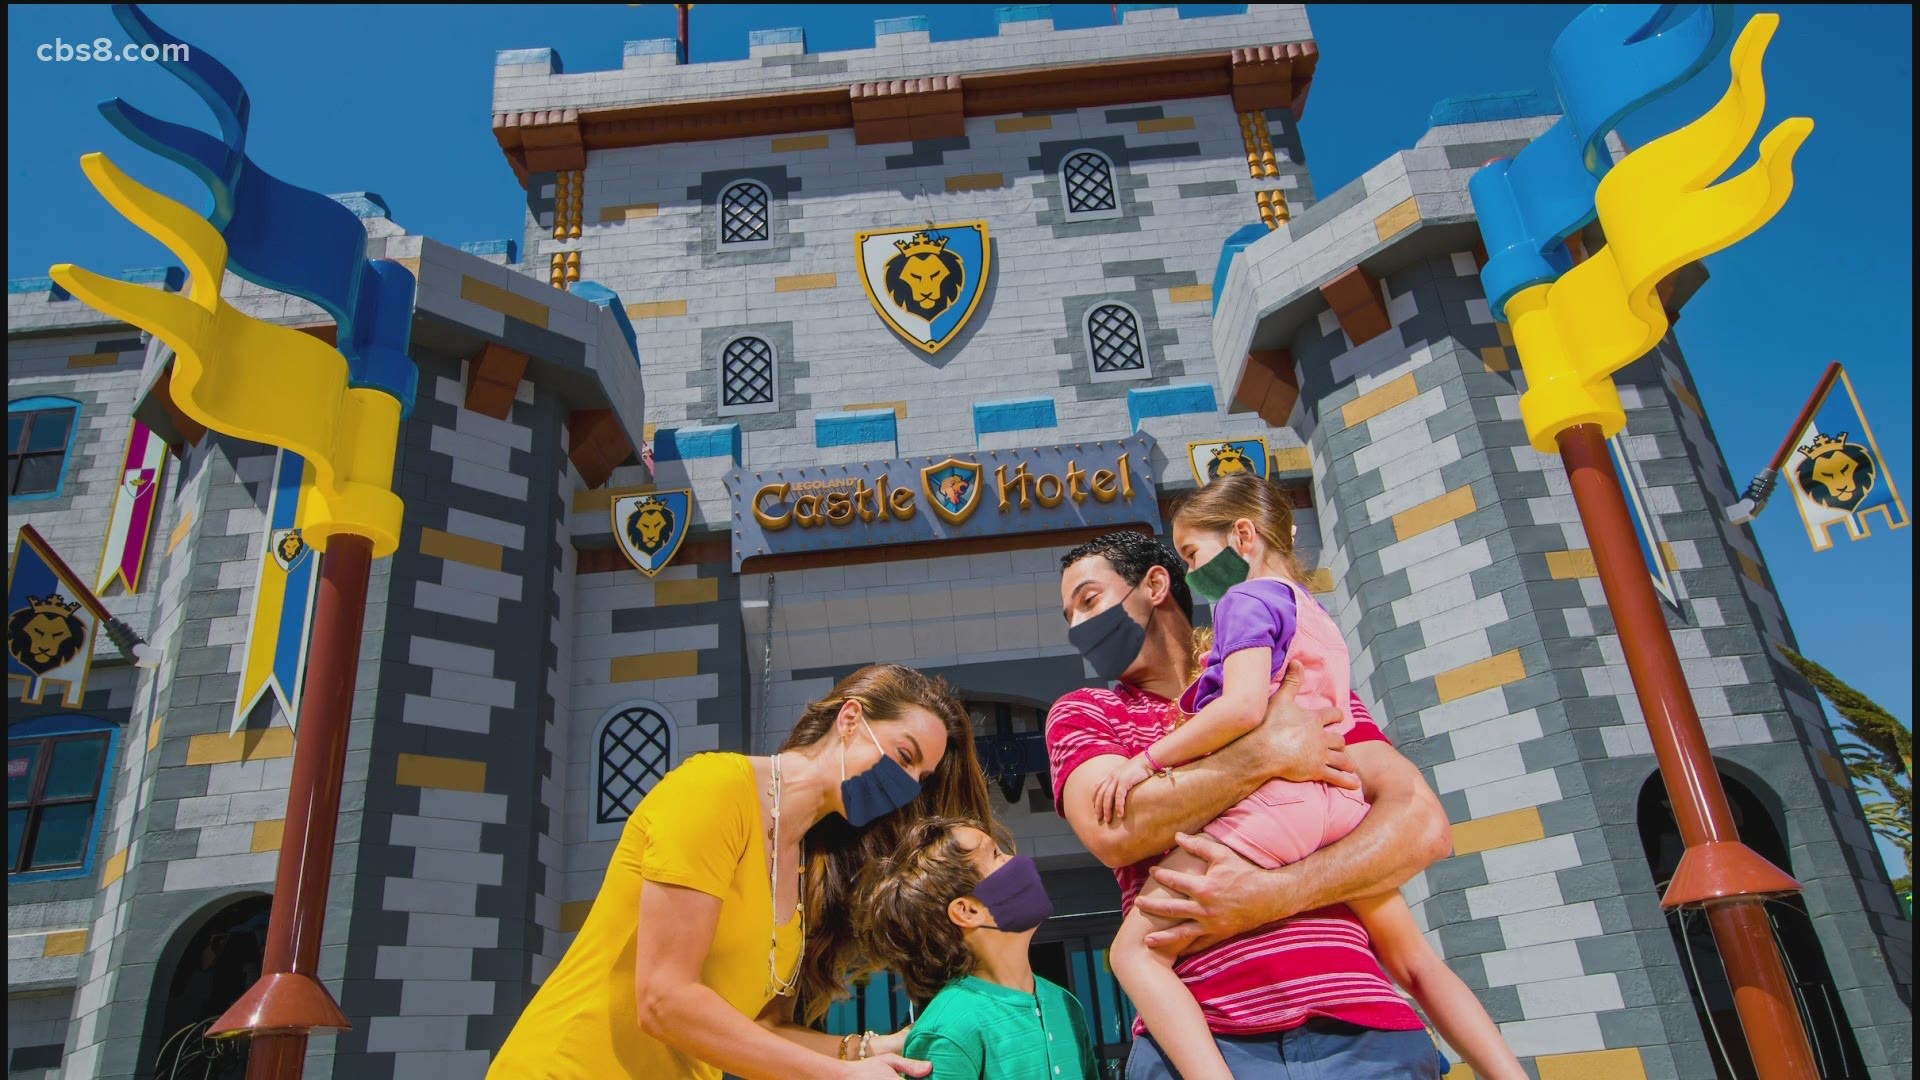 LEGOLAND is giving guests outdoor experiences to create memorable moments and have some fun. Julie Estrada and Kurt Stocks share details about 'Build ‘N Play'.